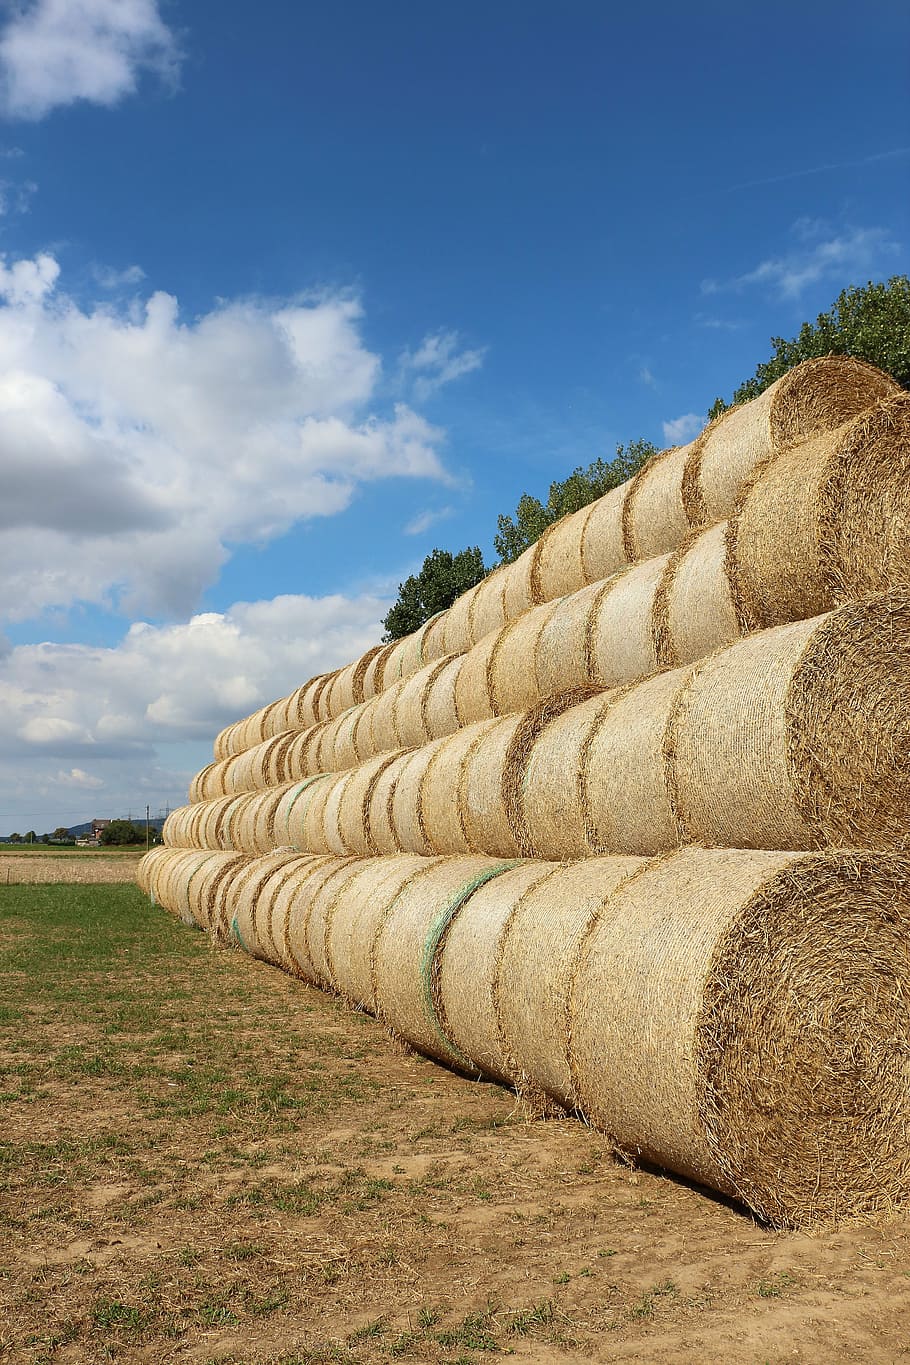 straw, straw bales, field, stubble, round bales, harvested, agriculture, clouds, sky, straw role